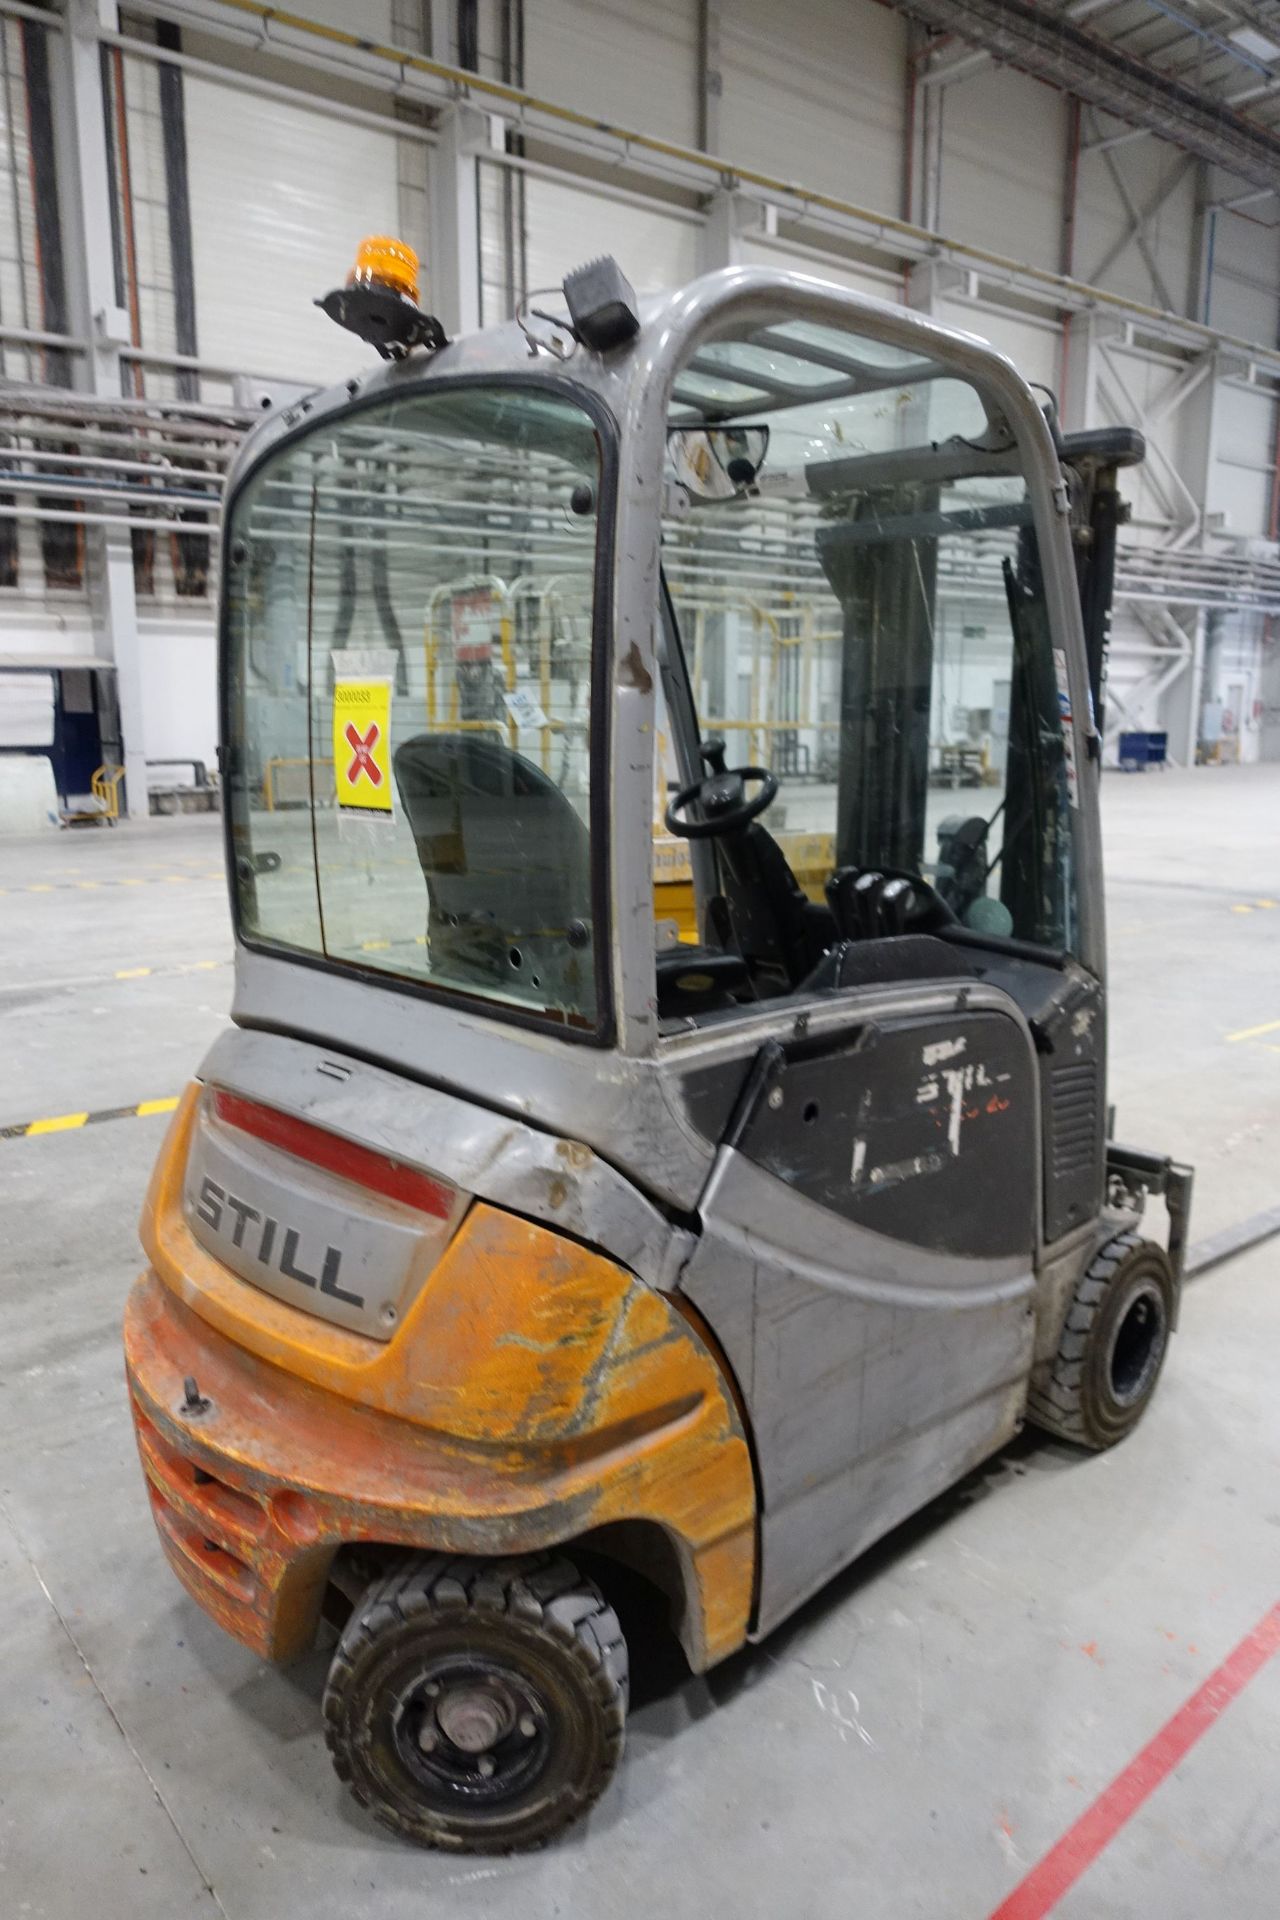 STILL RX20-20P Electric Forklift Truck, 2,000kg Capacity with Sideshift, Ser # 516216H00380 (2017) - Image 5 of 44